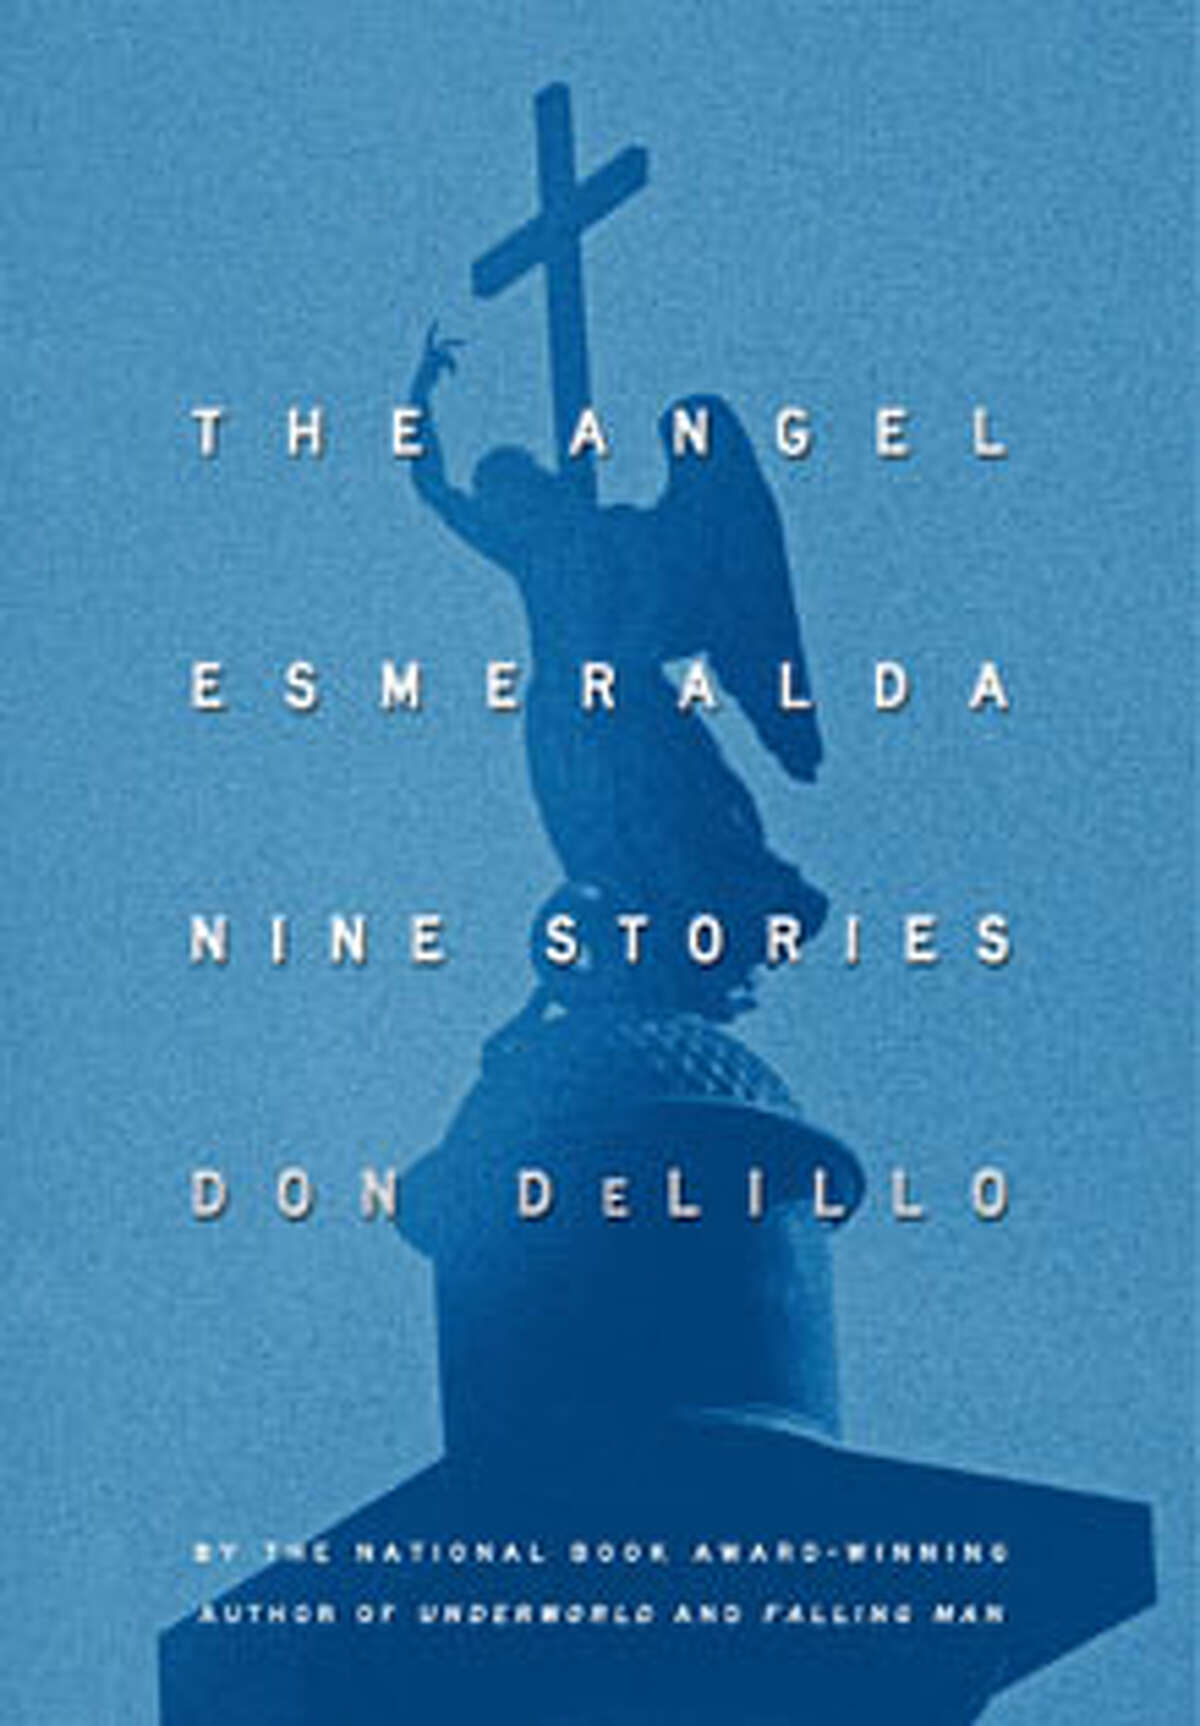 "The Angel Esmeralda: Nine Stories," by Don DeLillo, is shown.